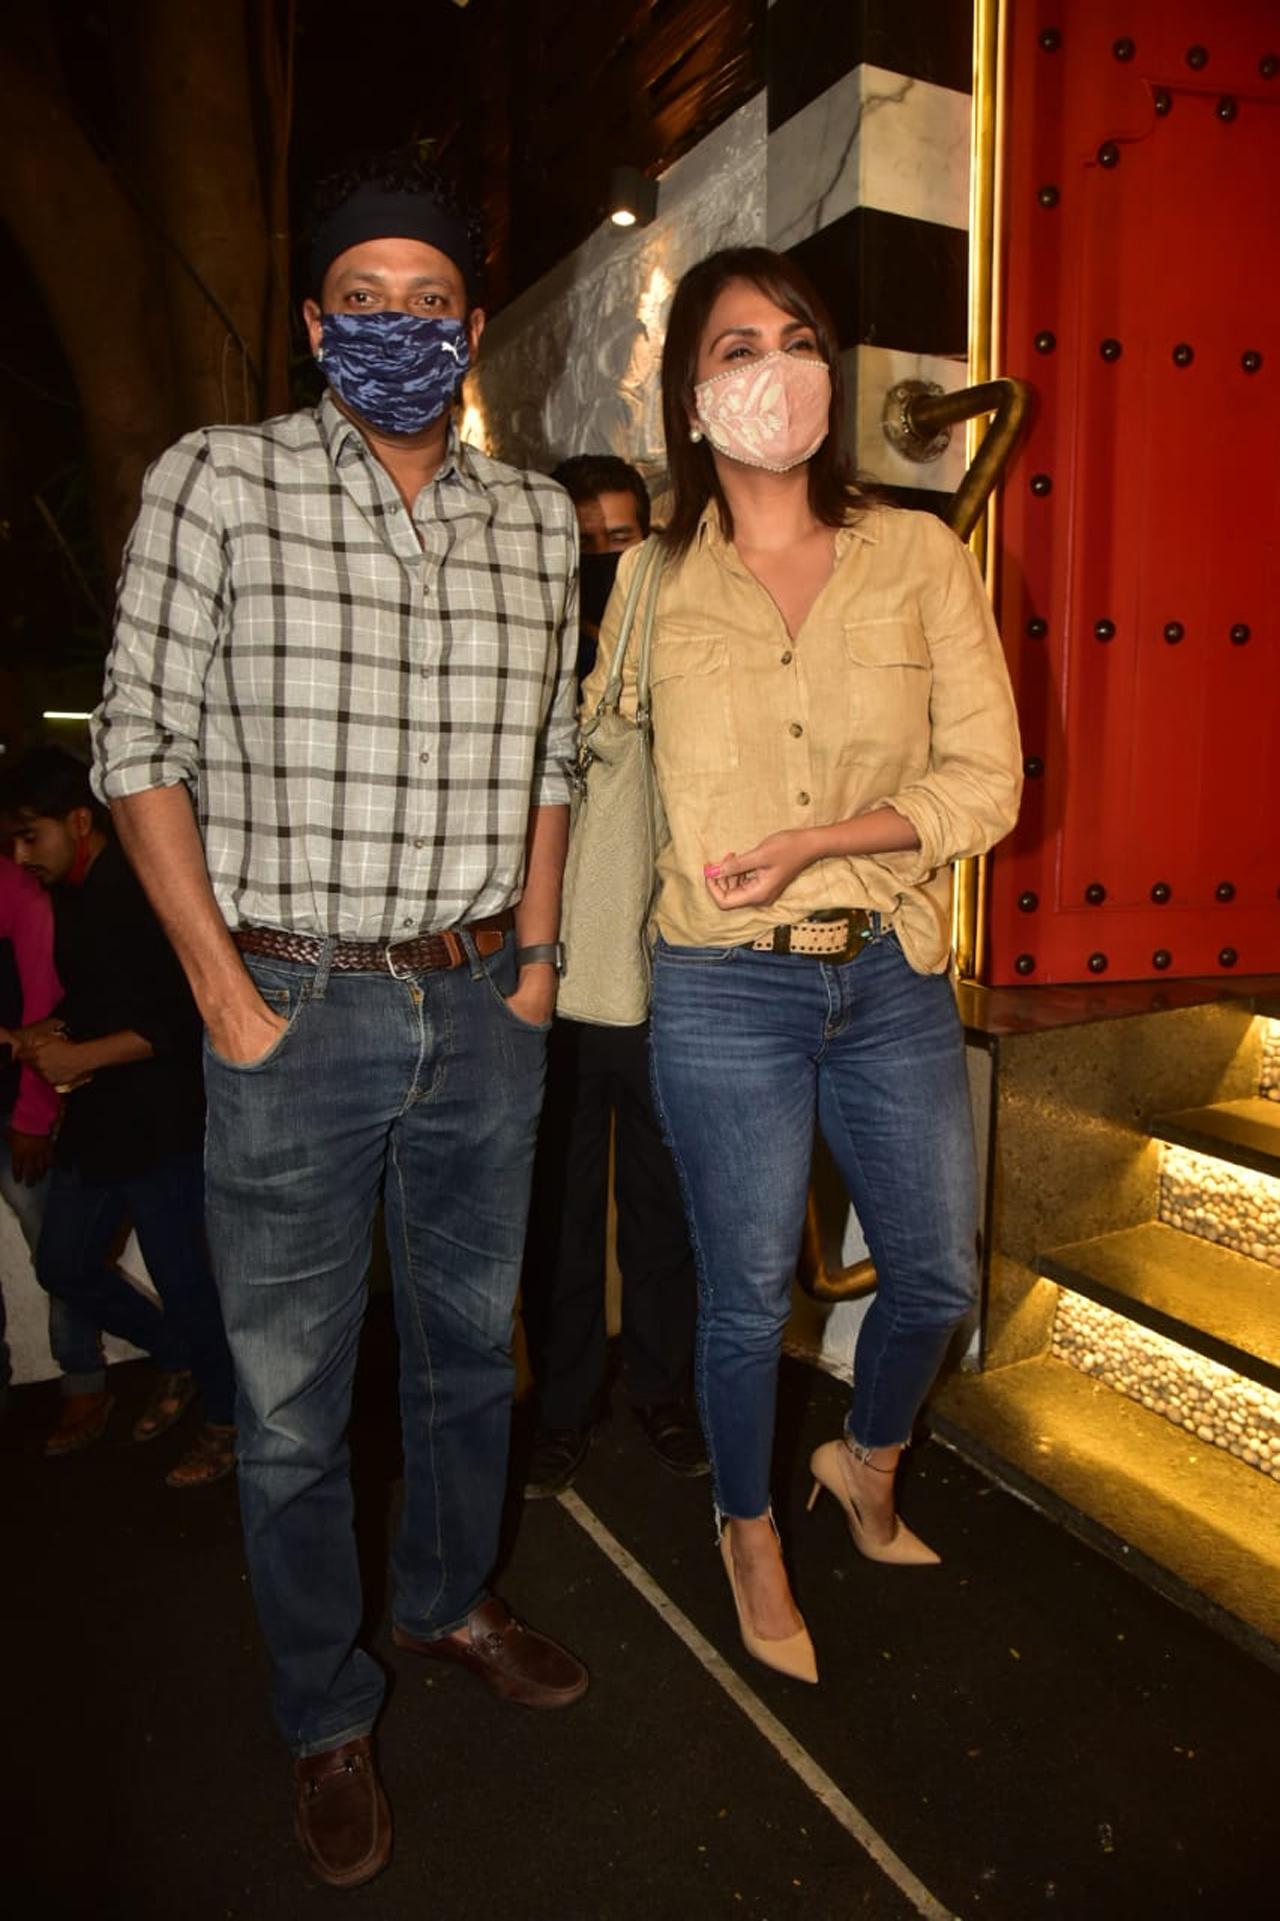 Lara Dutta was accompanied by her husband-tennis player Mahesh Bhupathi for the dinner outing. The couple willingly posed for the paparazzi.